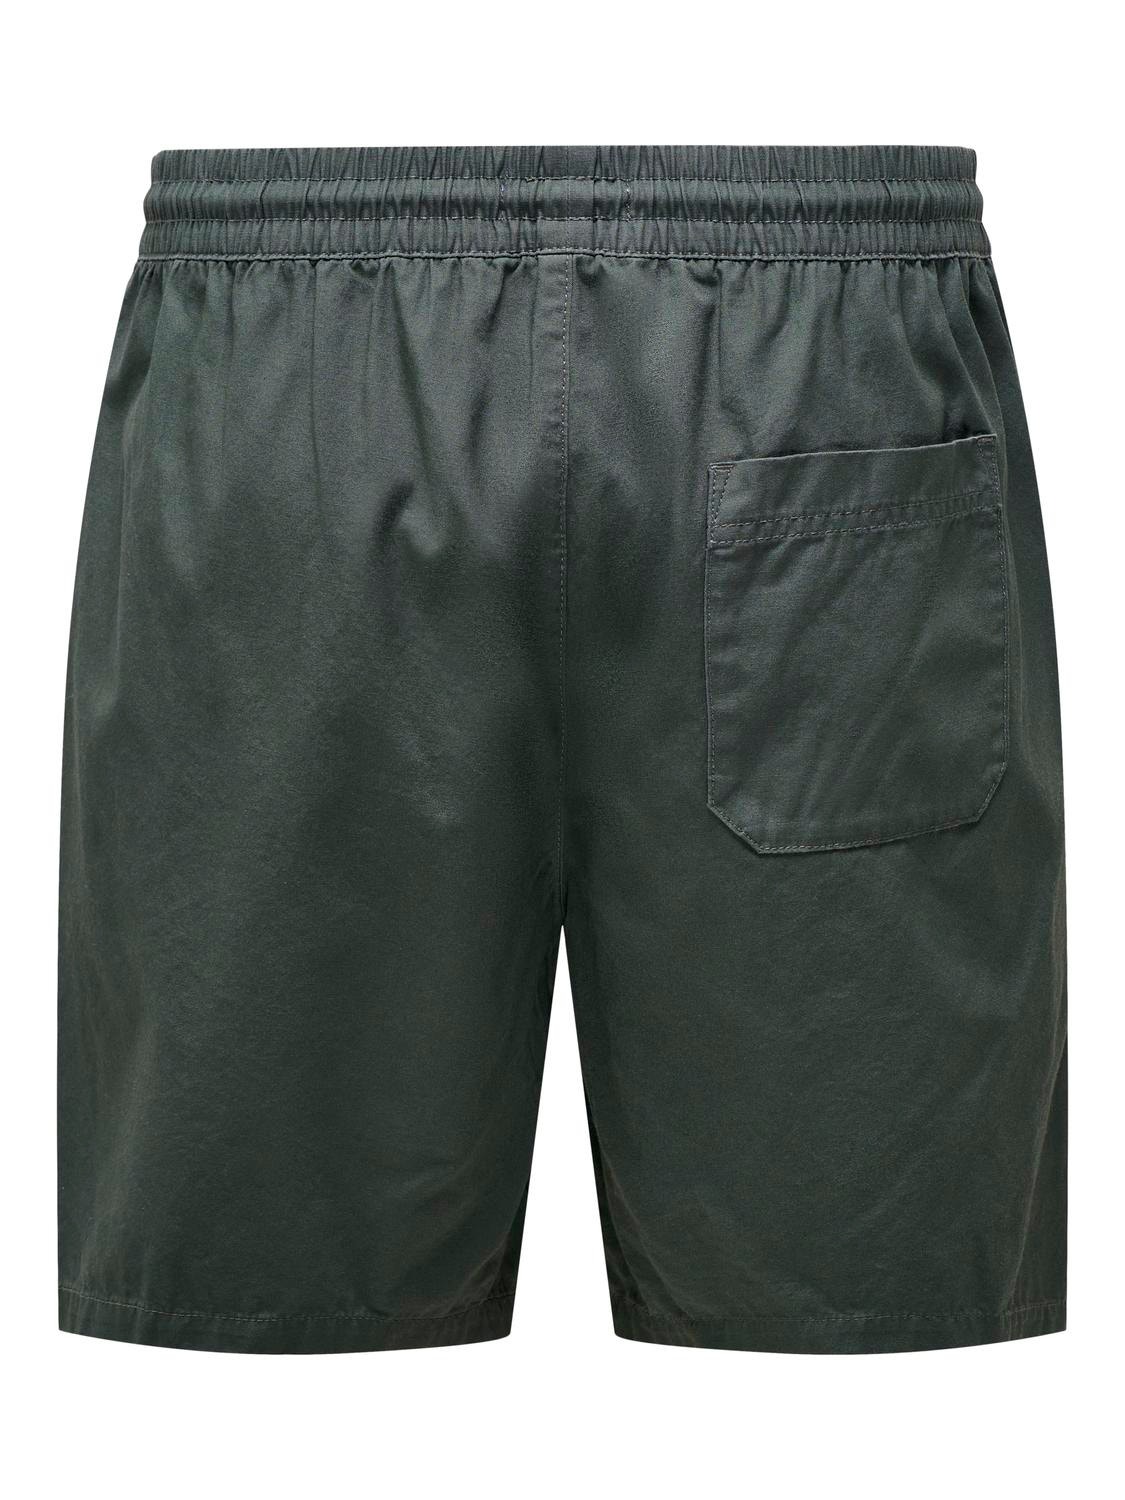 ONLY & SONS Normal passform Shorts -Balsam Green - 22027949